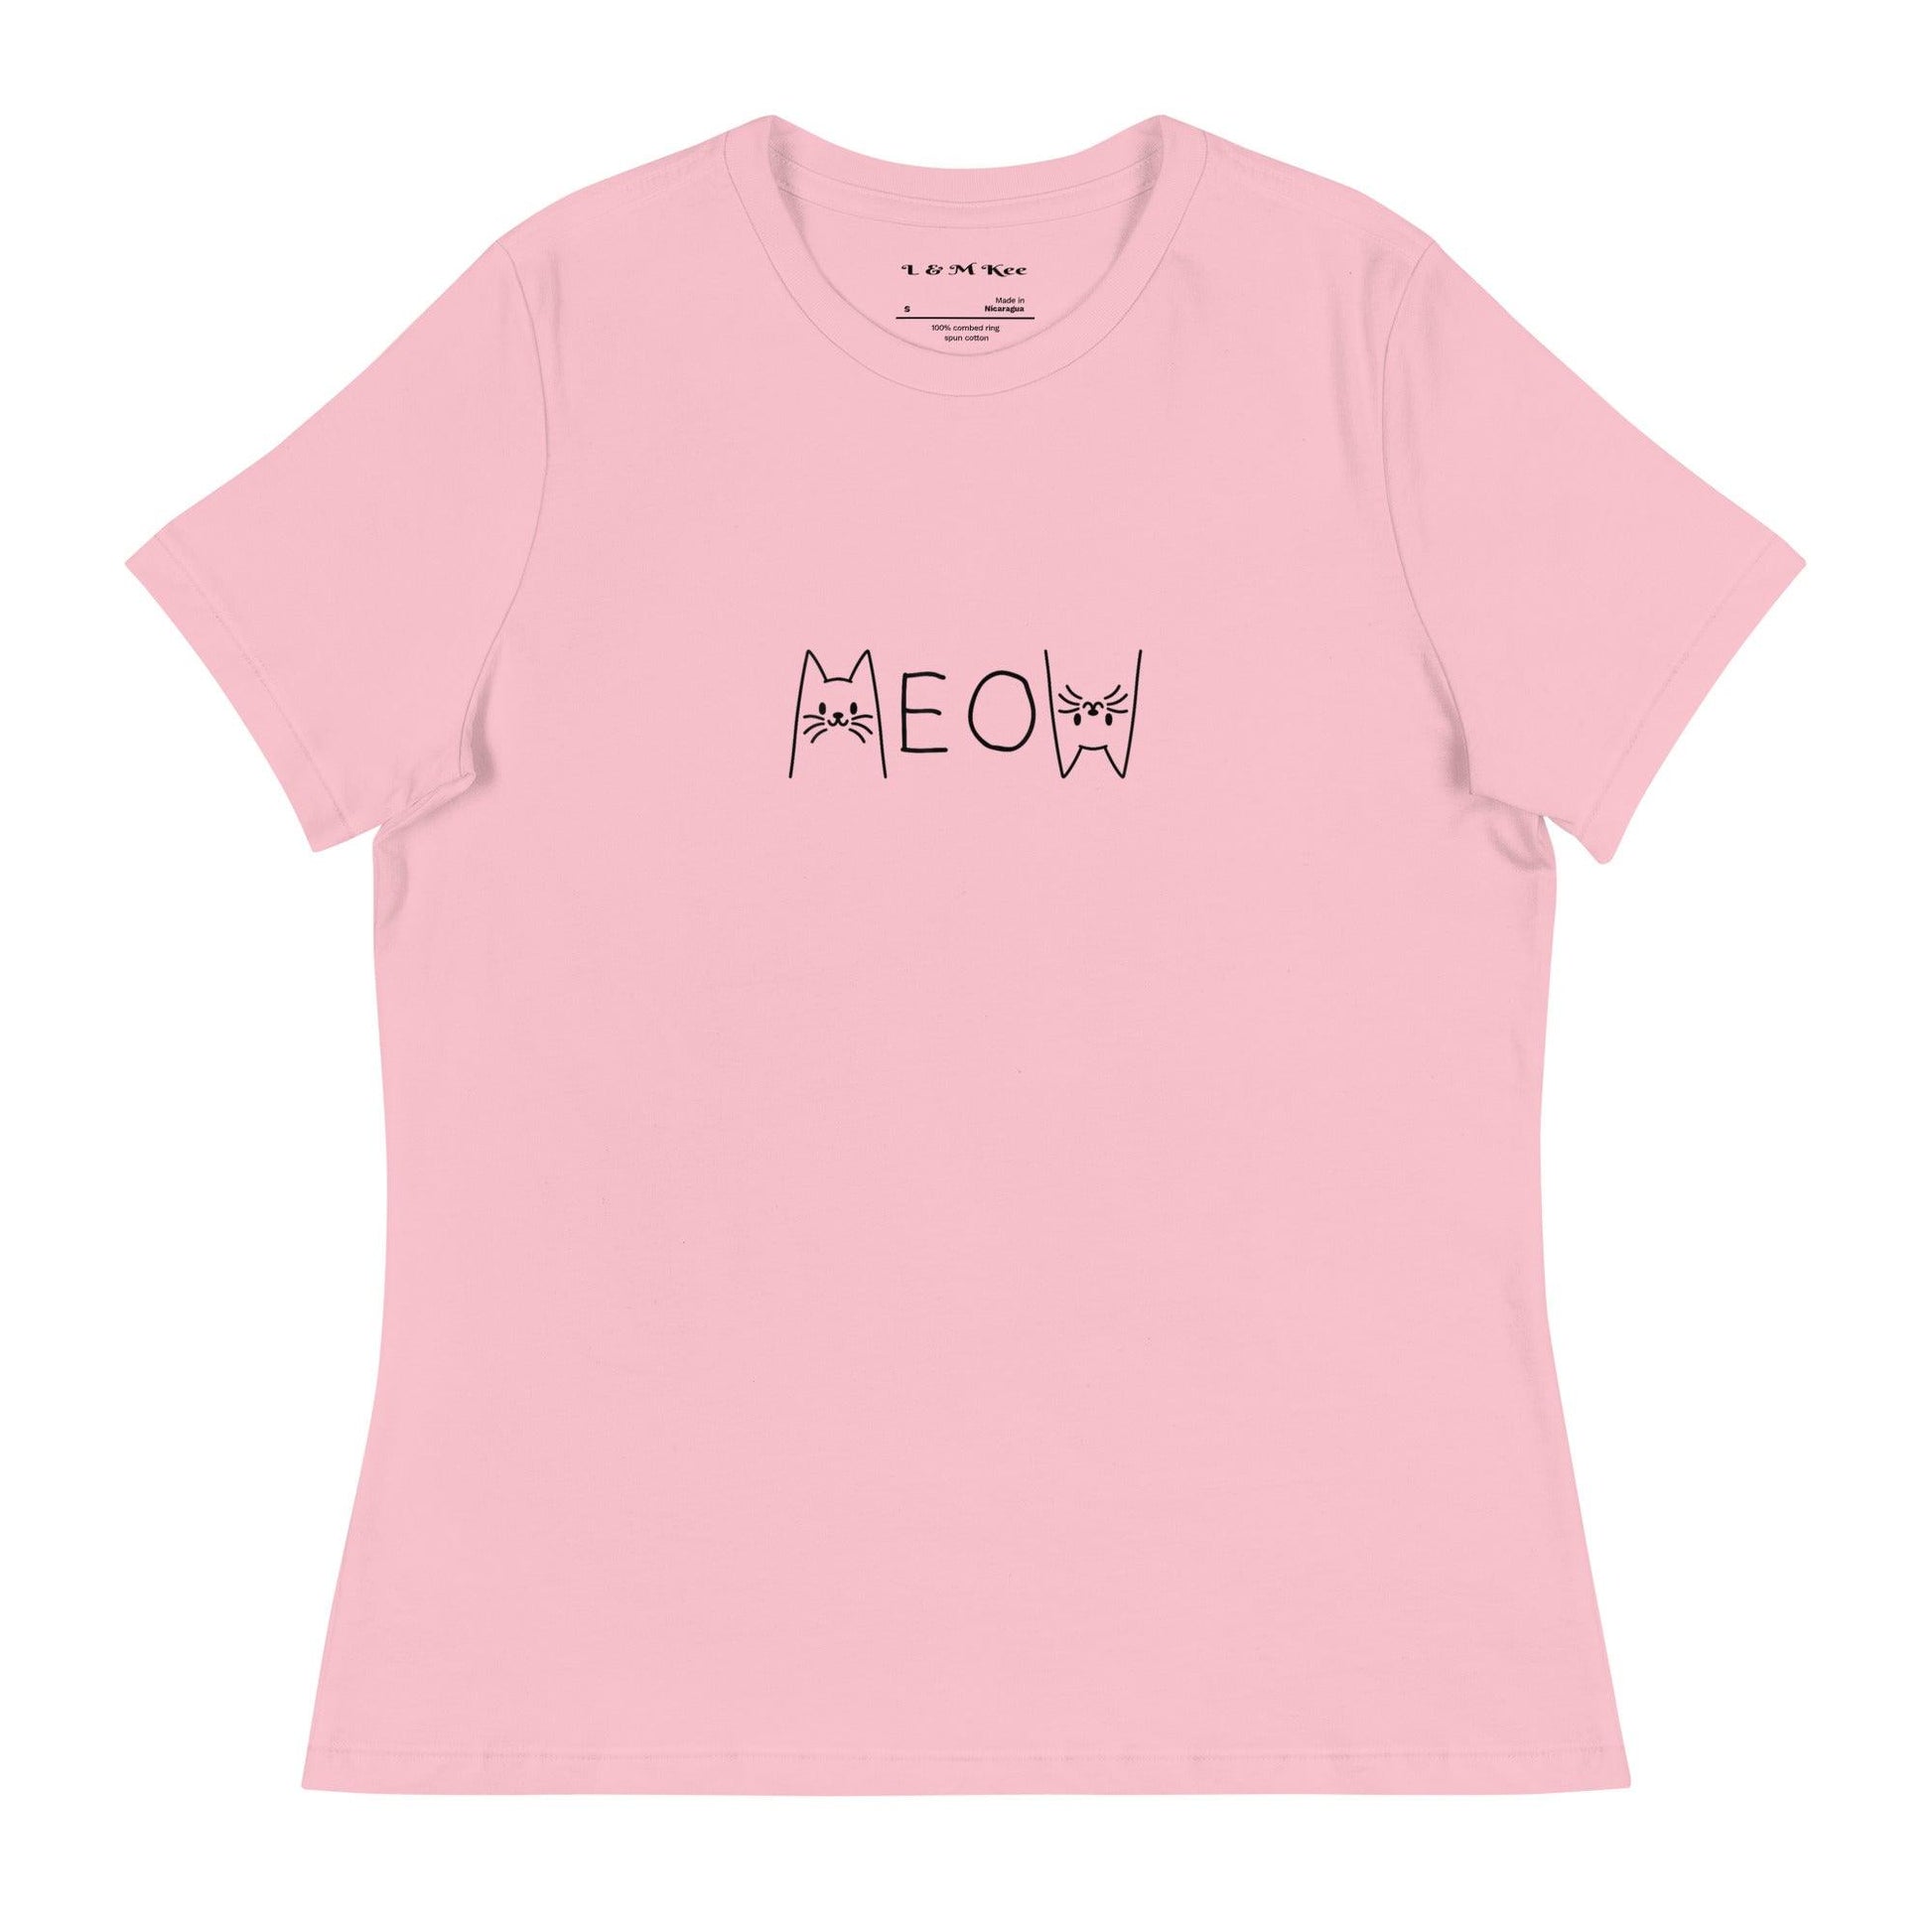 Meow Relaxed T-Shirt - L & M Kee, LLC